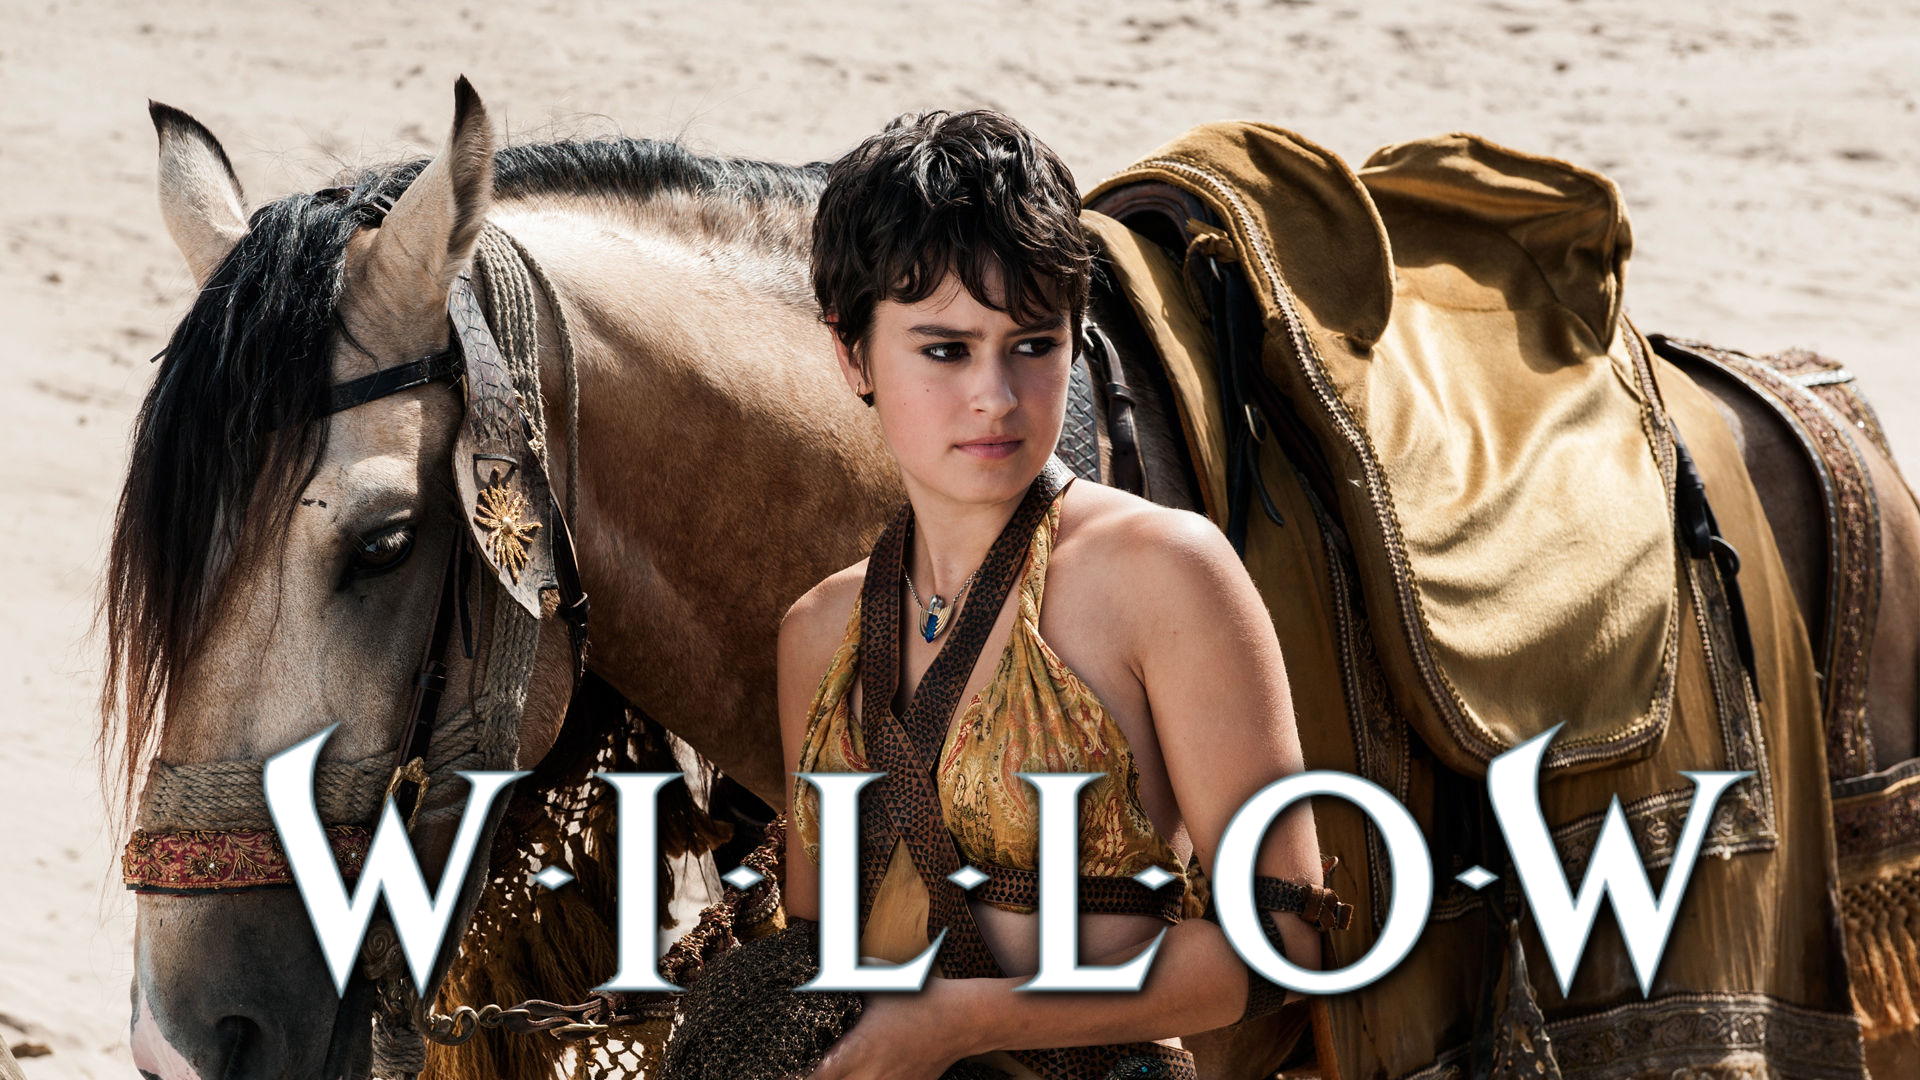 ‘Game of Thrones’ Actress Rosabell Laurenti Sellers Set to Appear in Disney+’s ‘Willow’